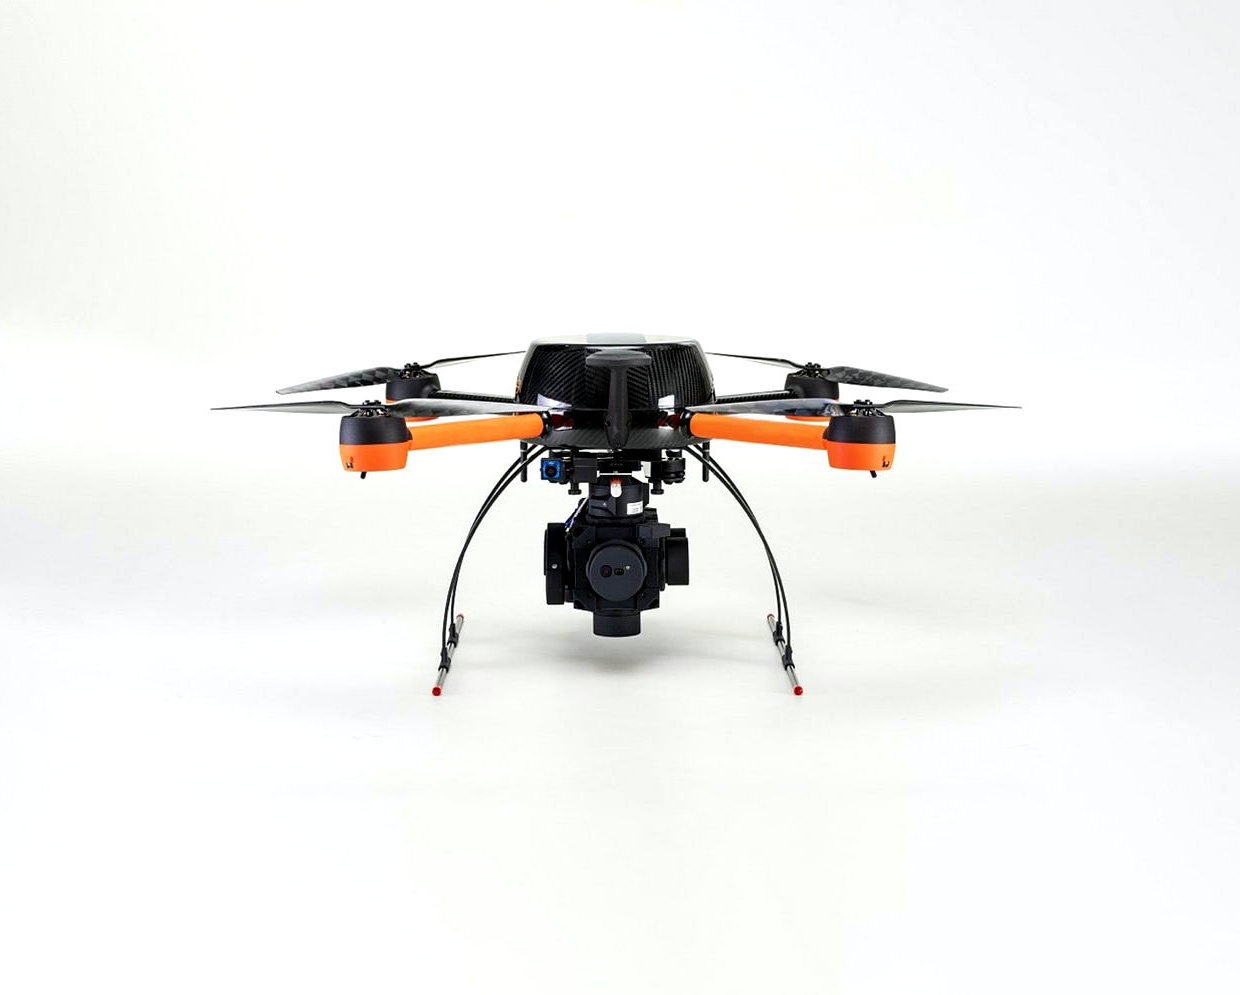 Aeromon BH-12 Measurement device attached to a drone